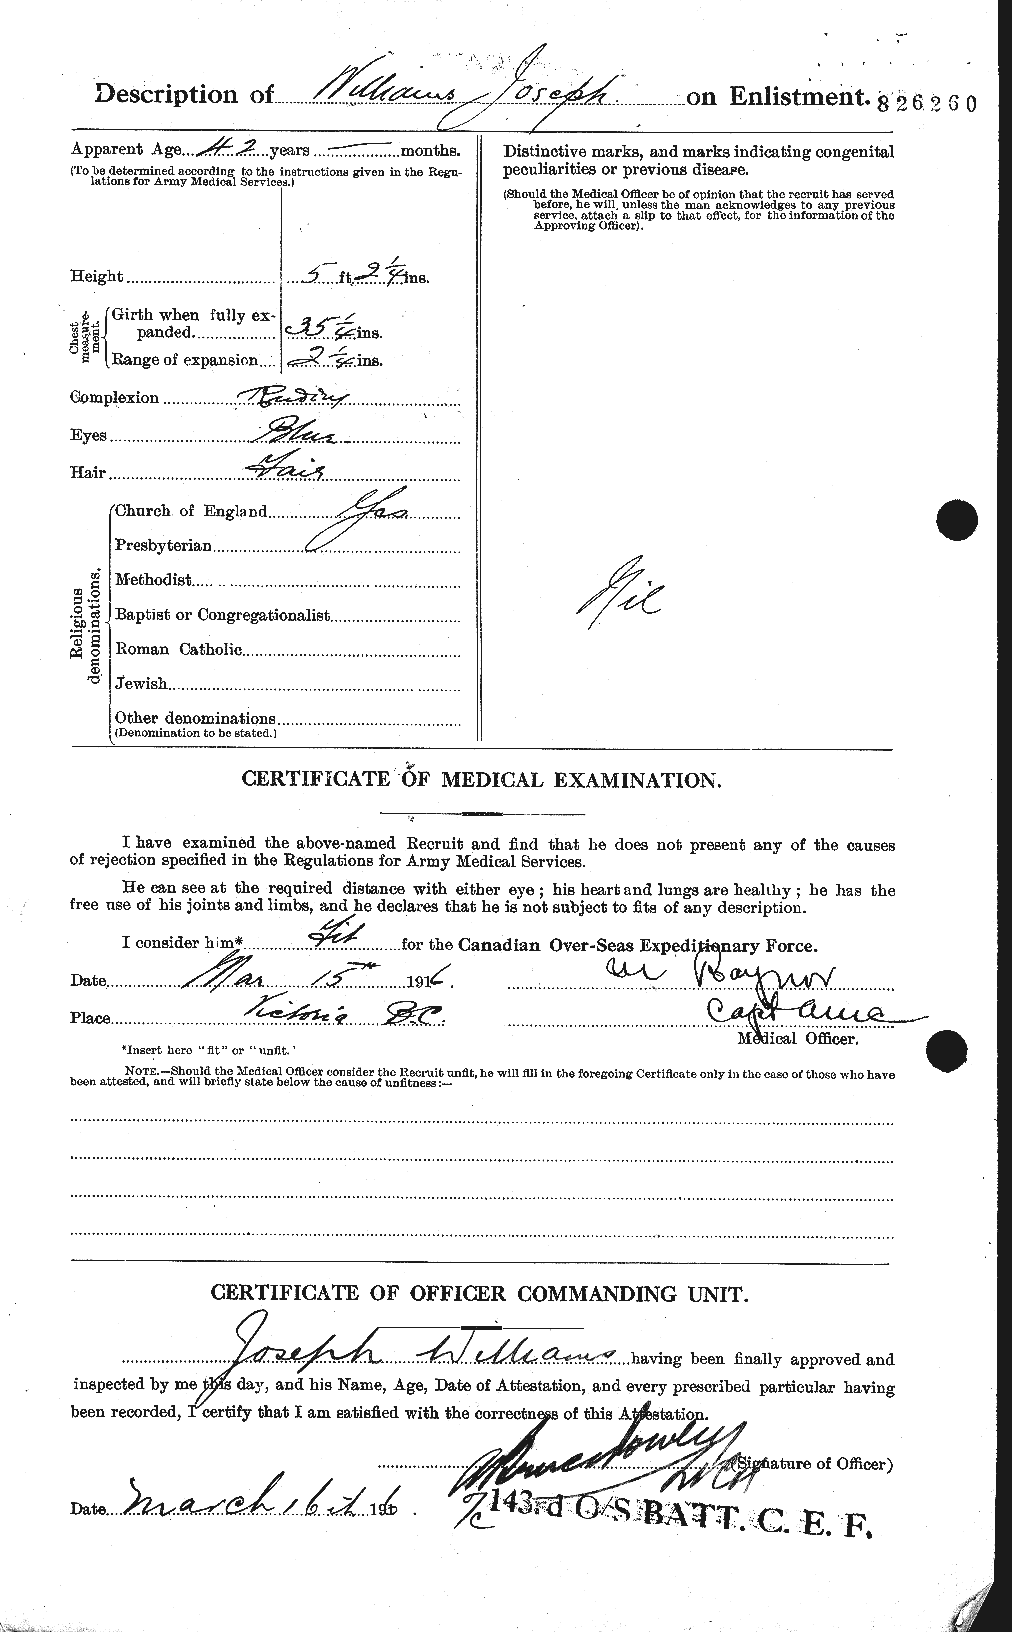 Personnel Records of the First World War - CEF 675436b